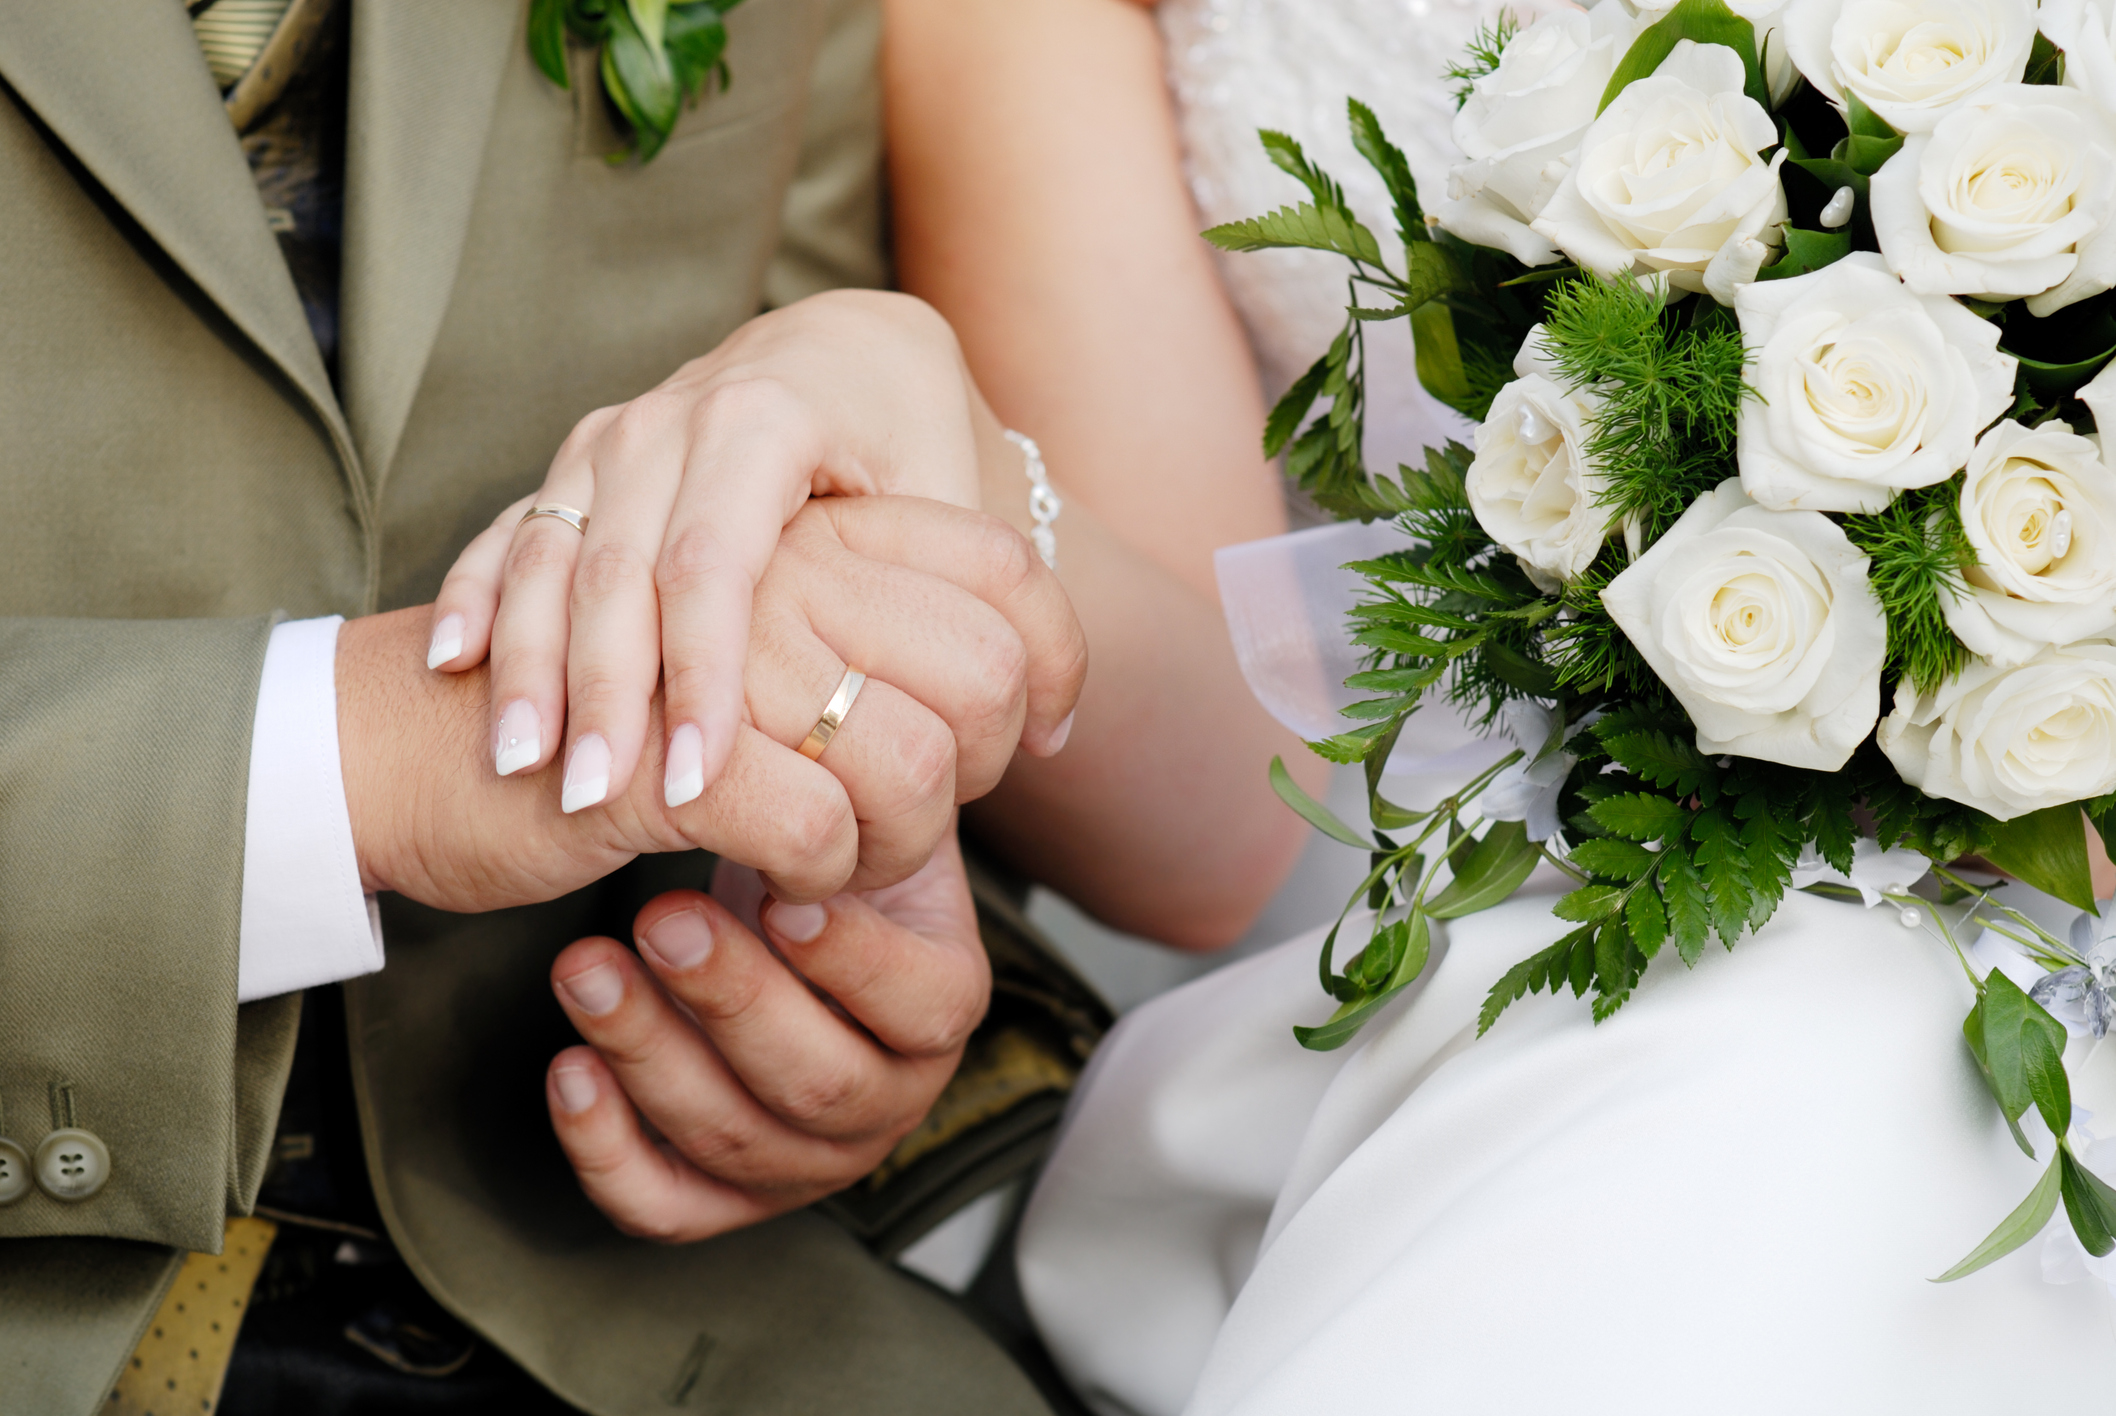 Know Your Rights When Getting Married in British Columbia